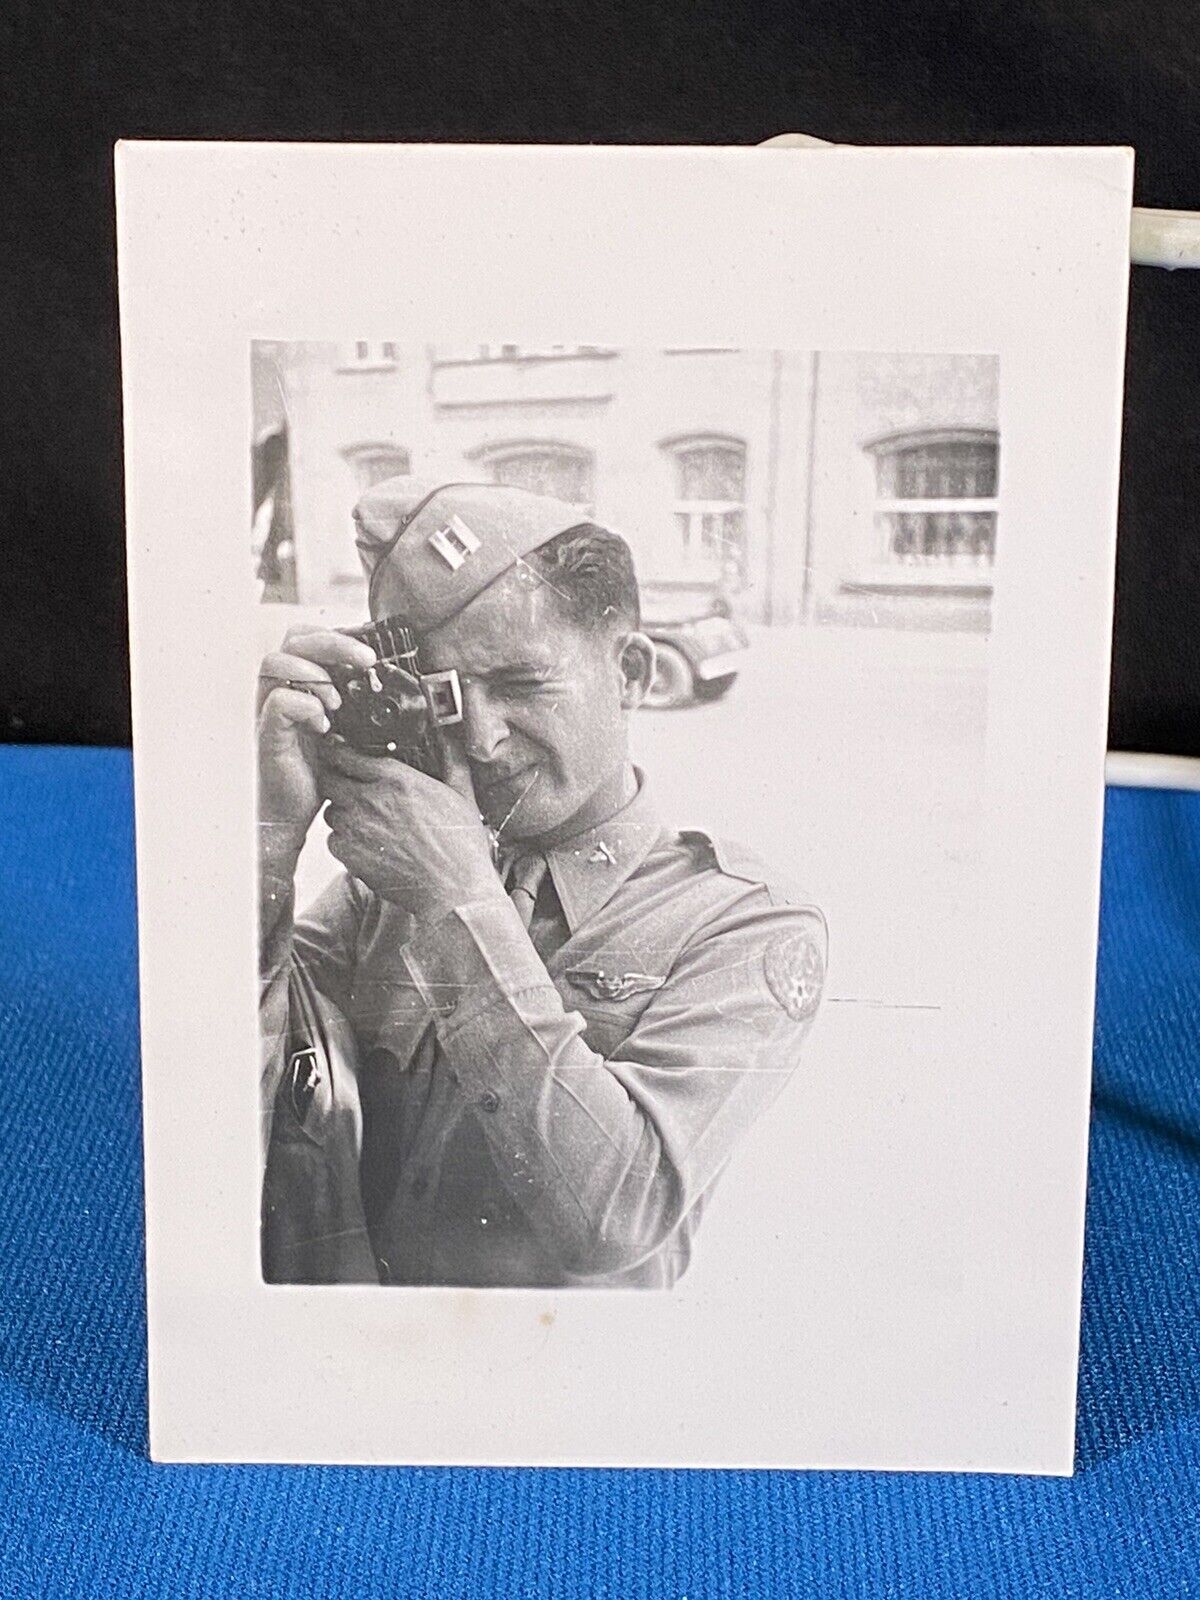 Using Camera in Germany Post WWII American Occupation US Army Vet Photos